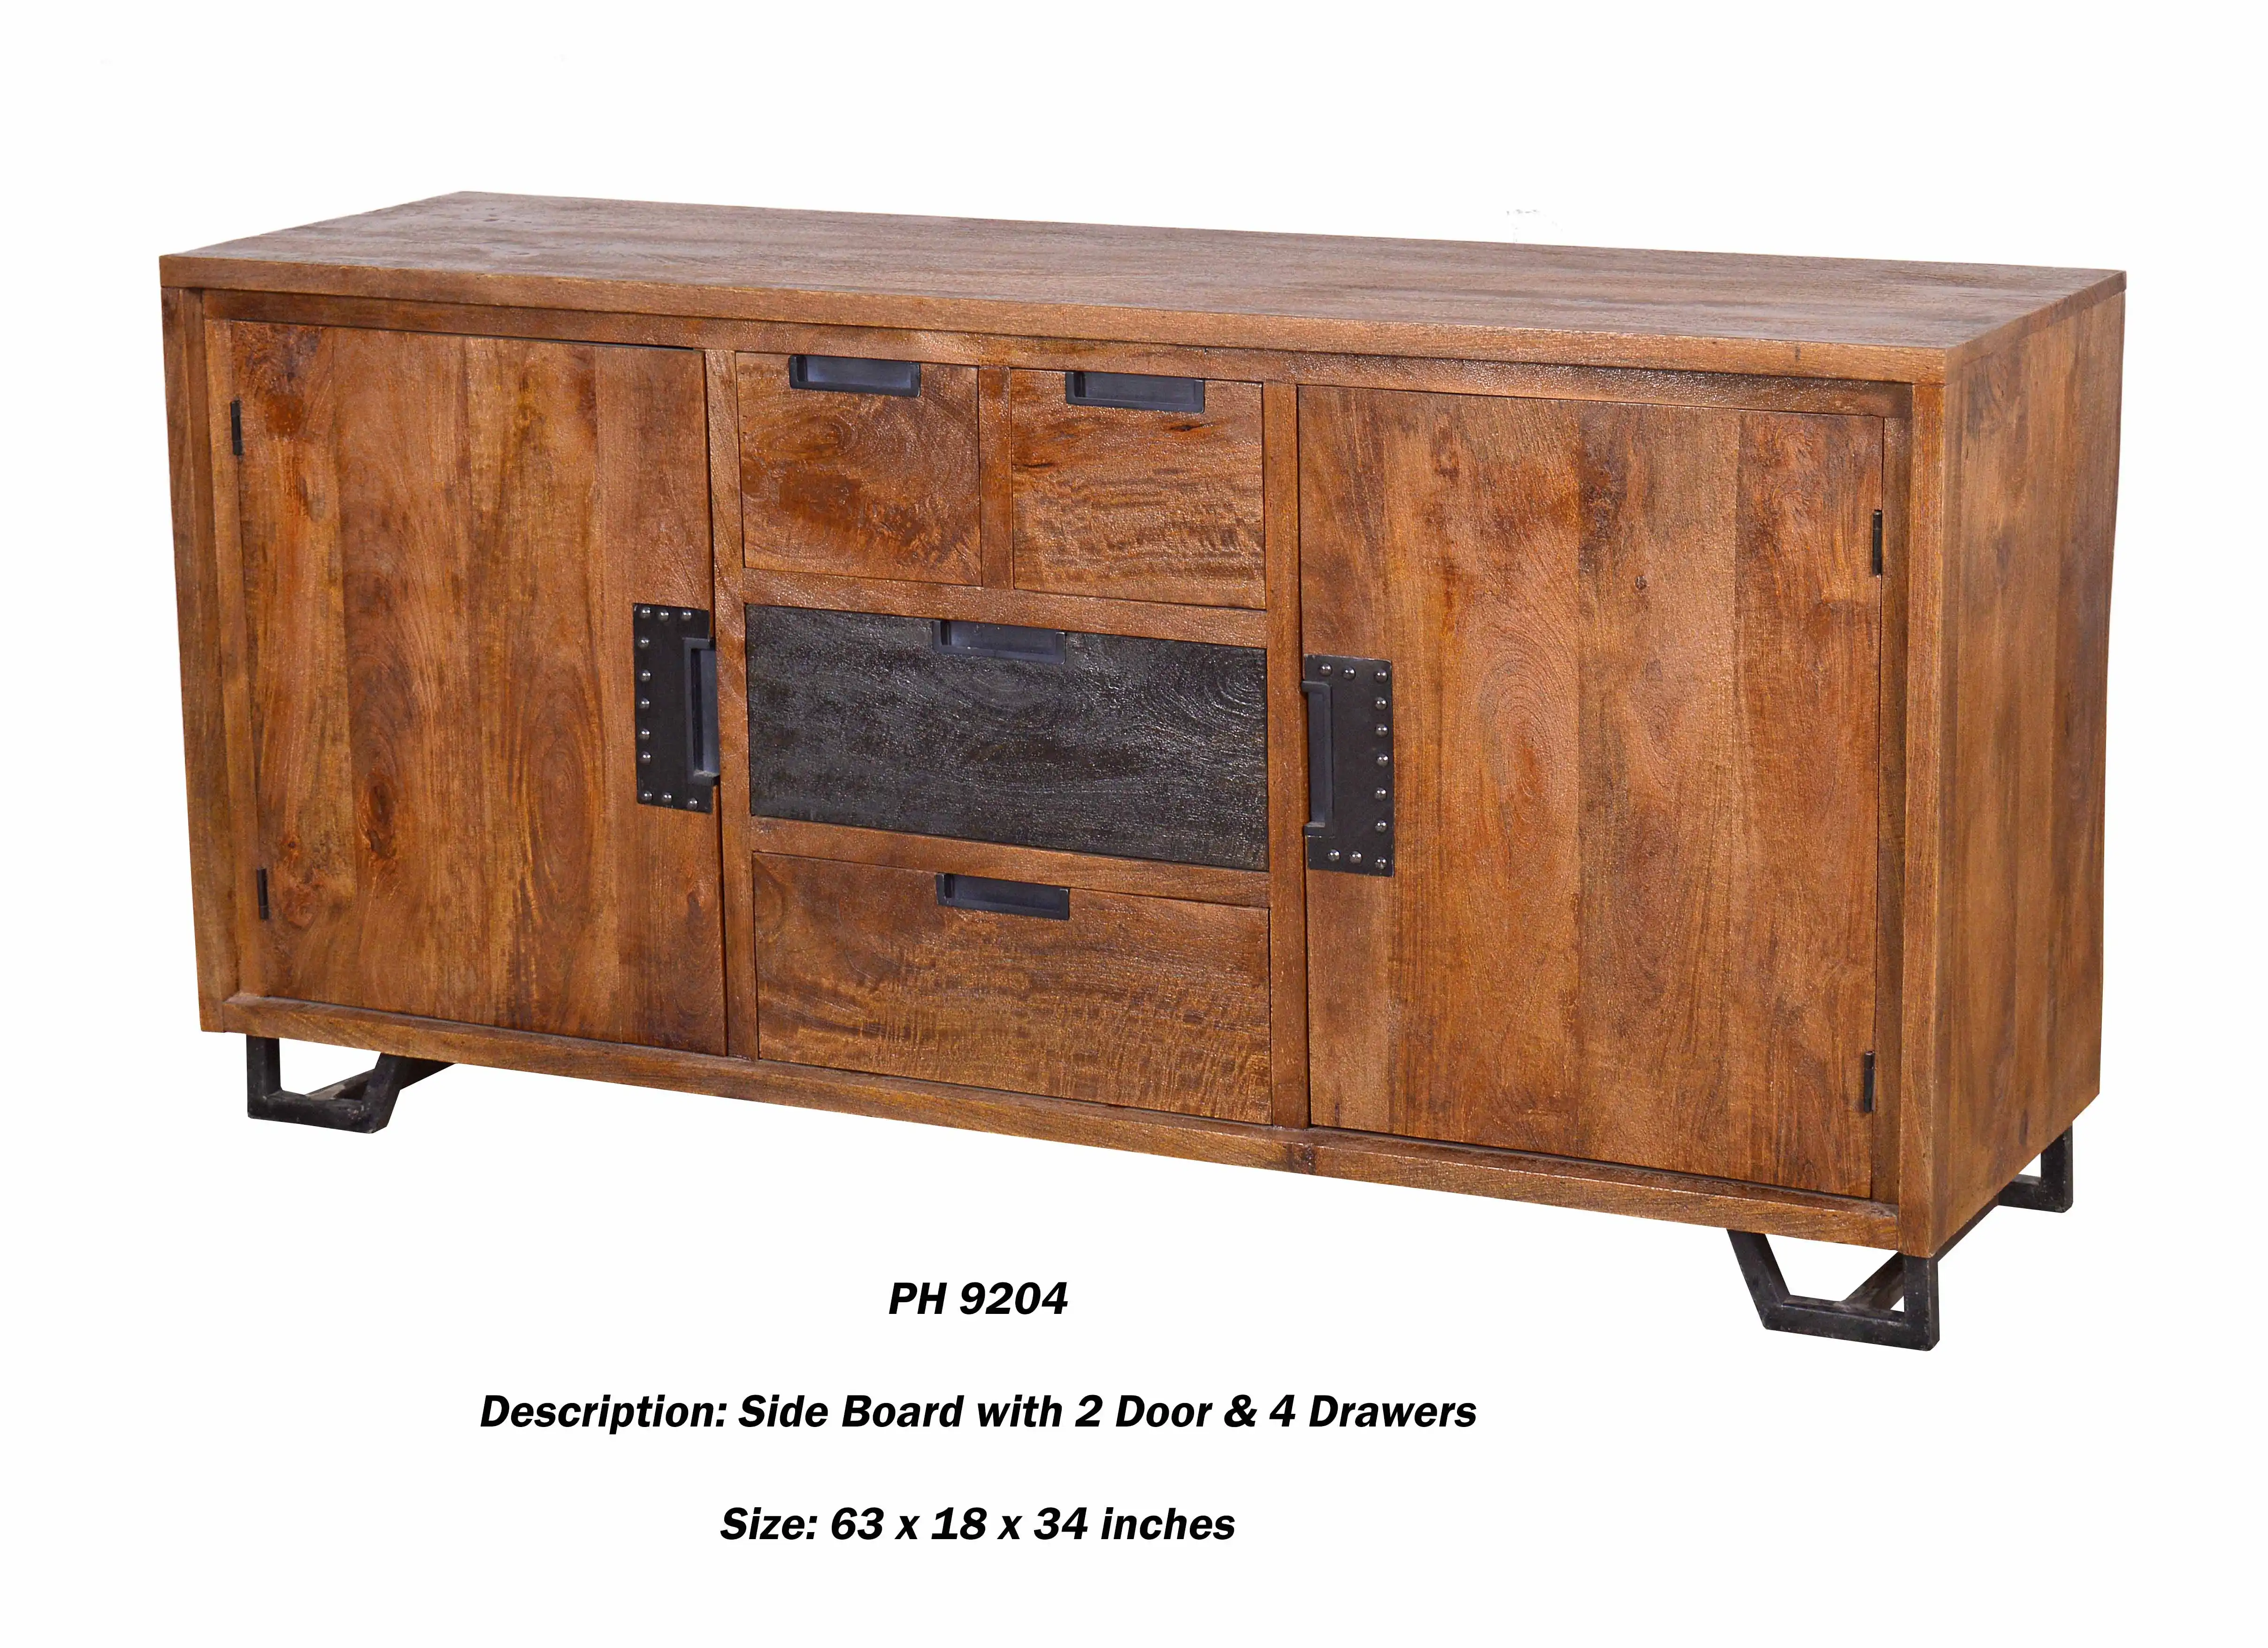 Side Board with 2 Doors & 4 Drawers
(KD) - popular handicrafts